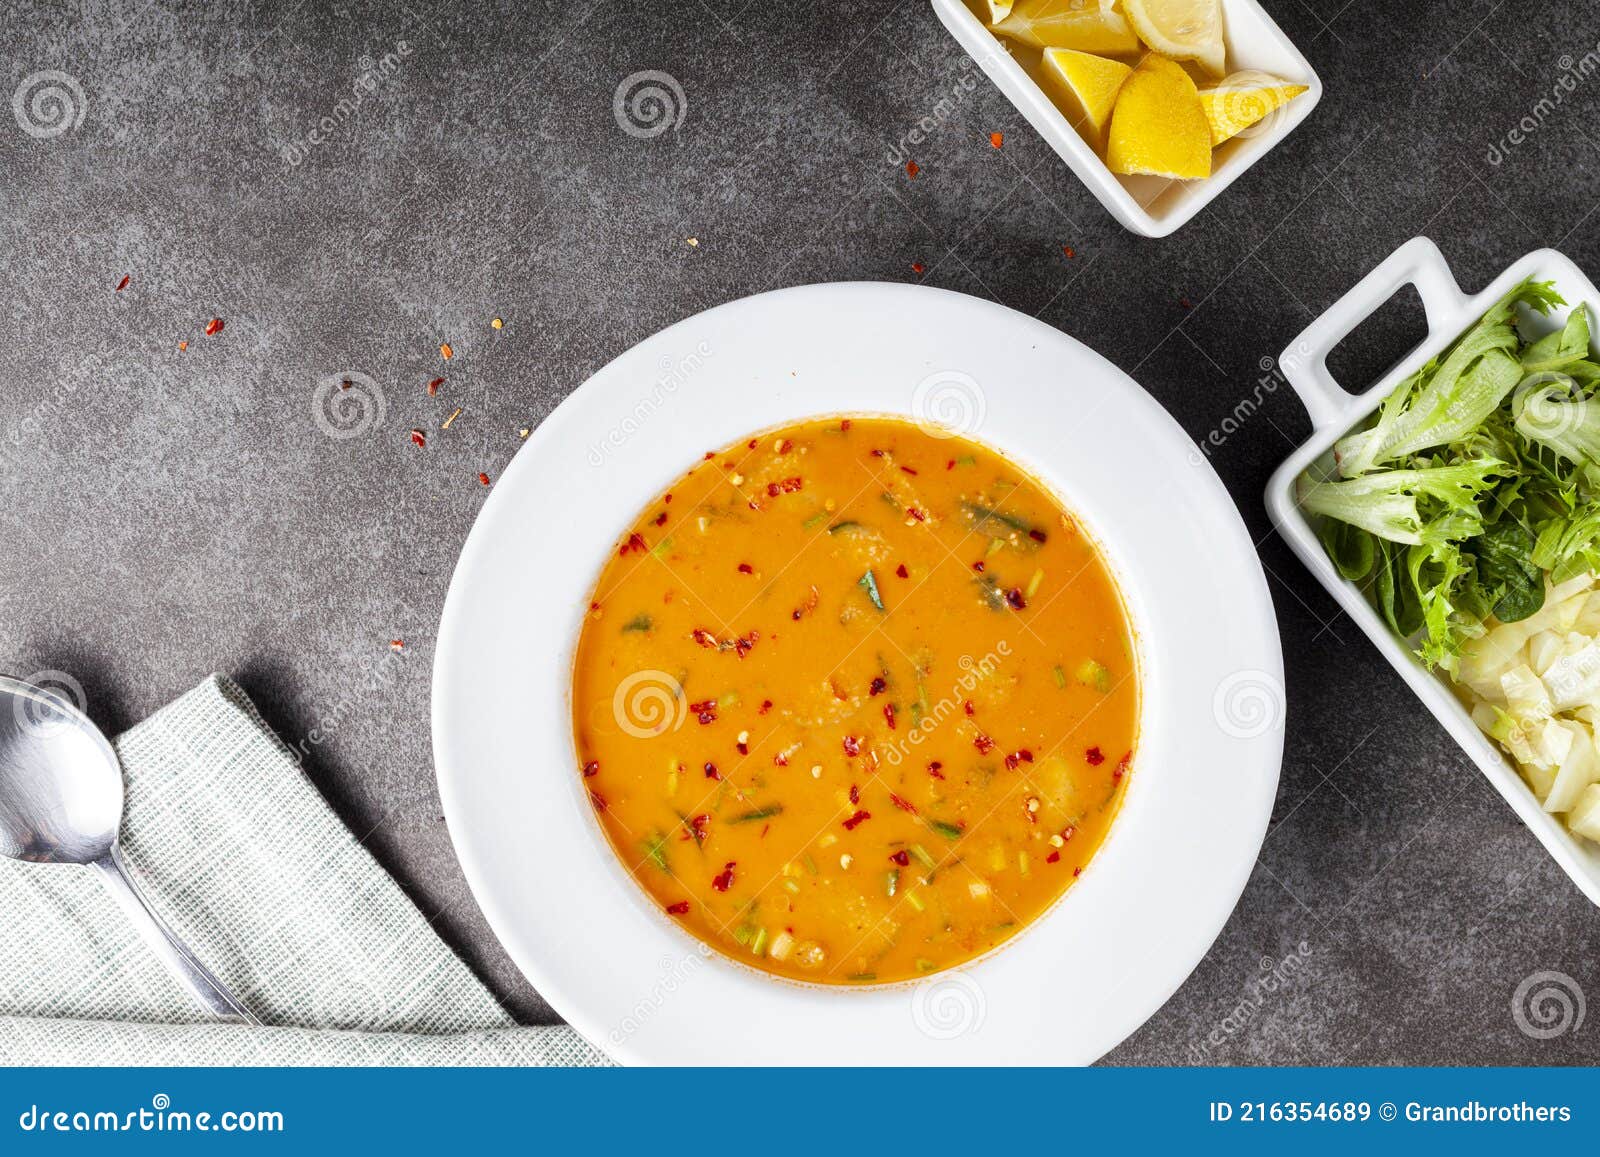 Batirik is a Bulgur Wheat Soup Made with Roasted Peanuts, Sesame and ...